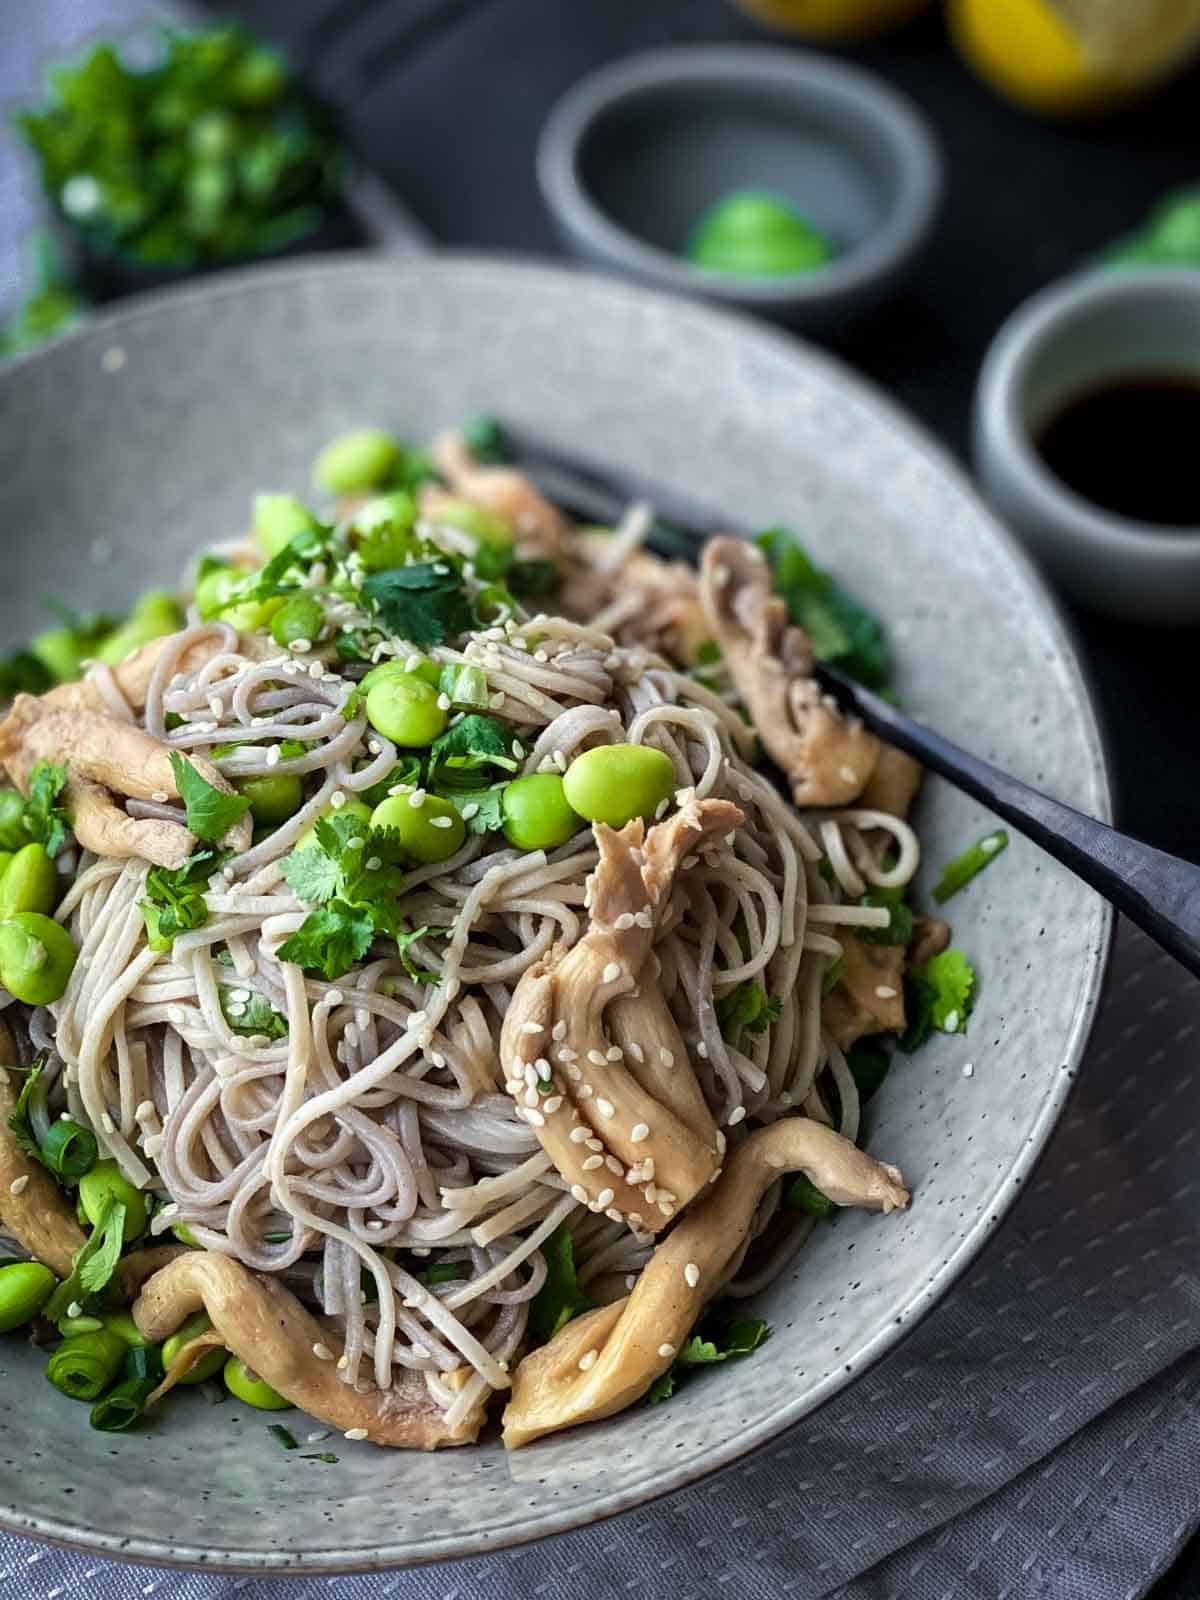 soba noodles, pearl mushrooms, edamame, spring onions, cilantro and sesame seeds served in a grey bowl with fork on side